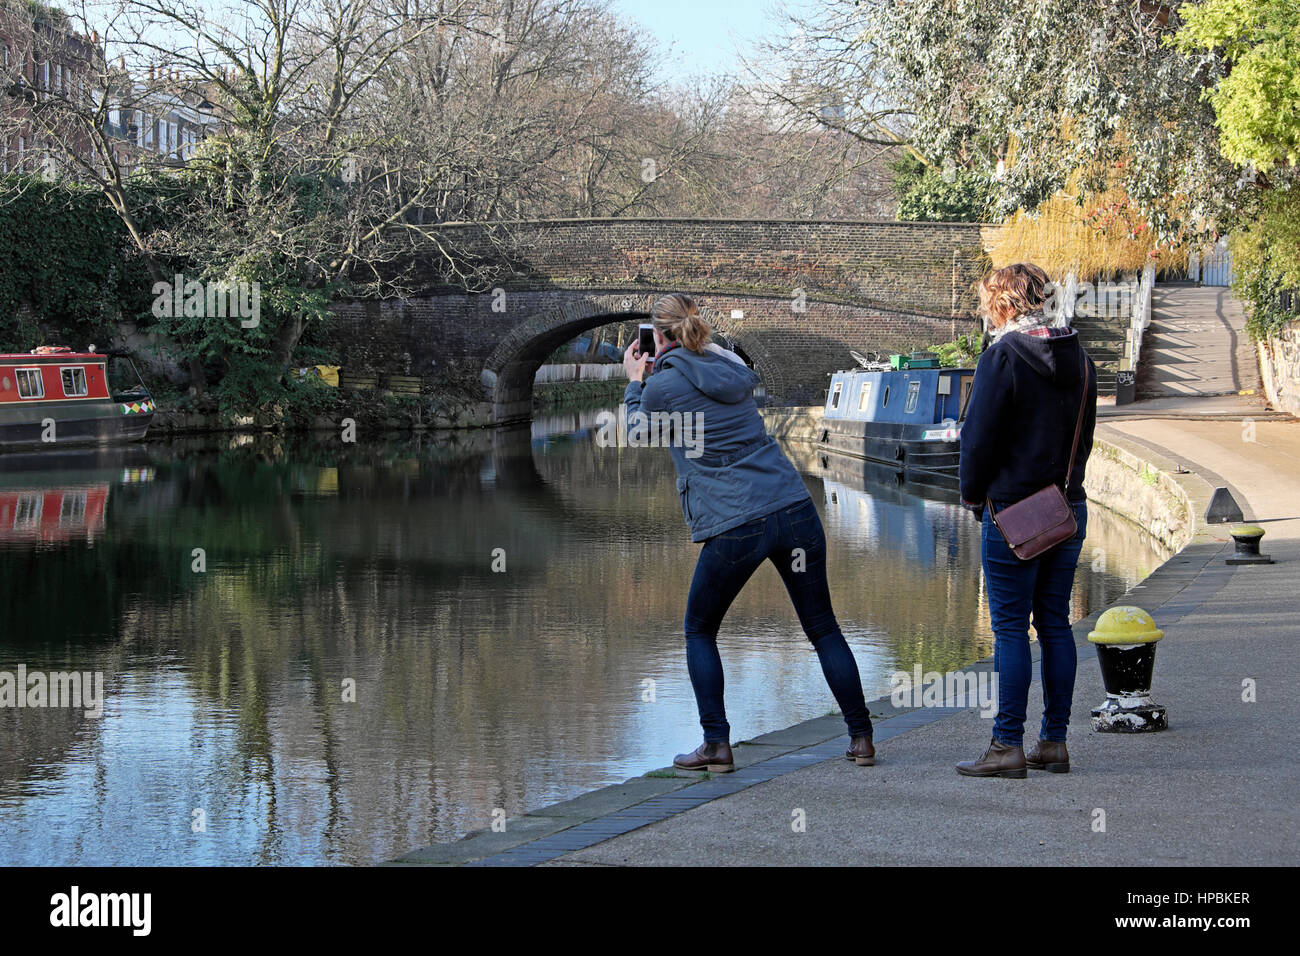 A woman tourist leaning to photograph bridge on City Road Basin area of Regents Canal in Islington, East London E1 England UK  KATHY DEWITT Stock Photo